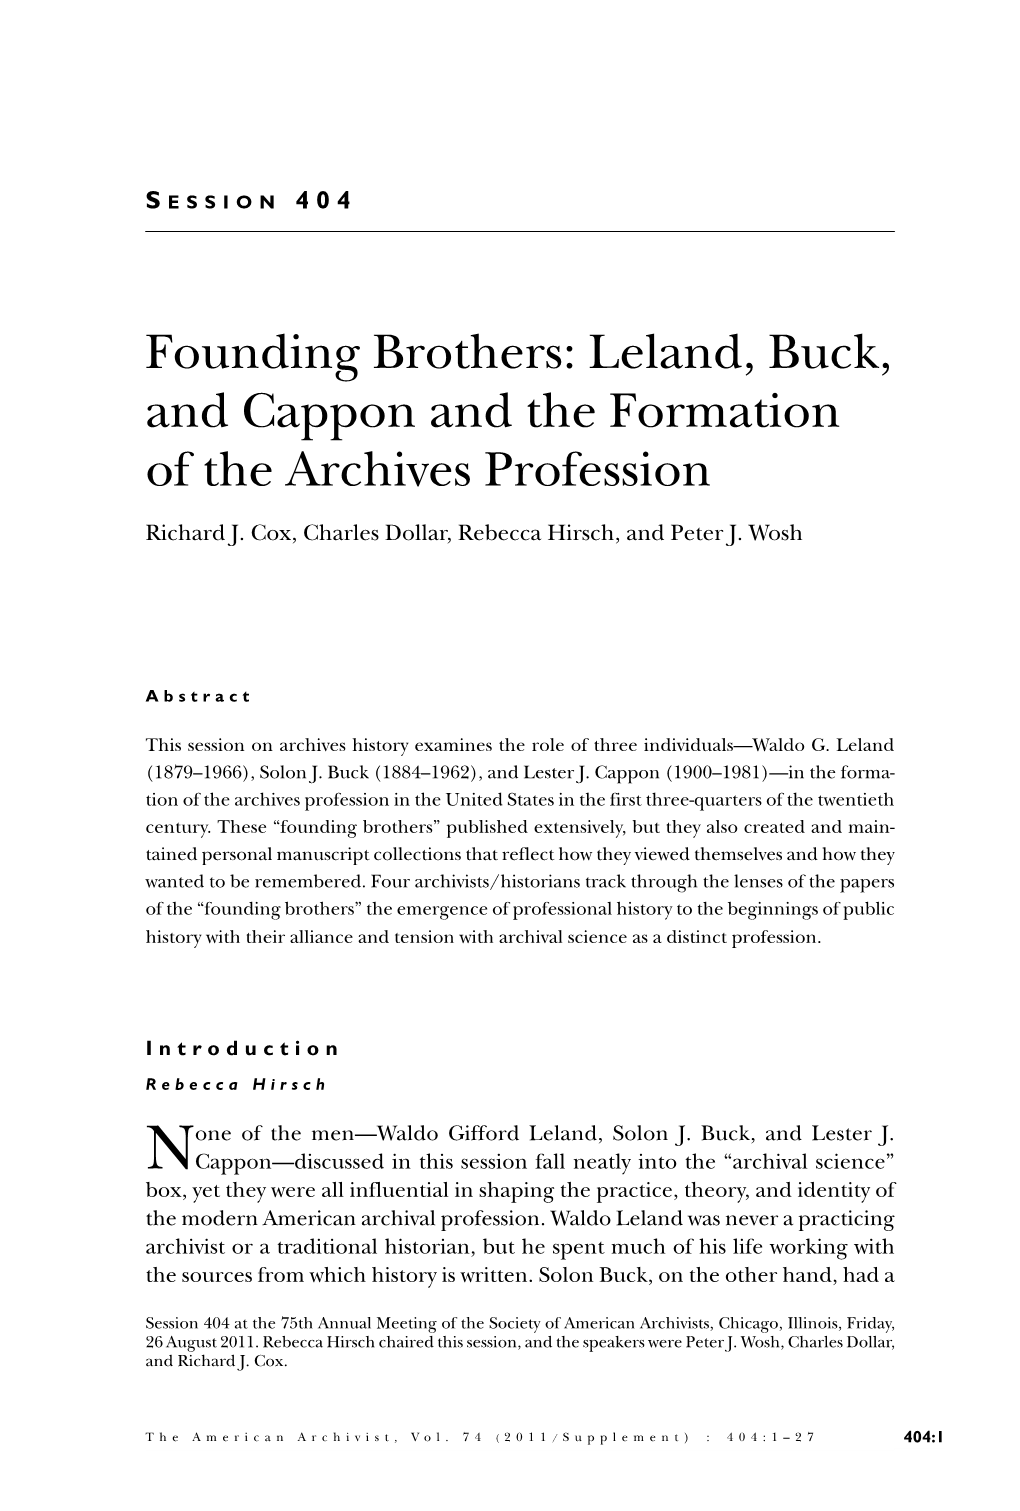 Founding Brothers: Leland, Buck, and Cappon and the Formation of the Archives Profession